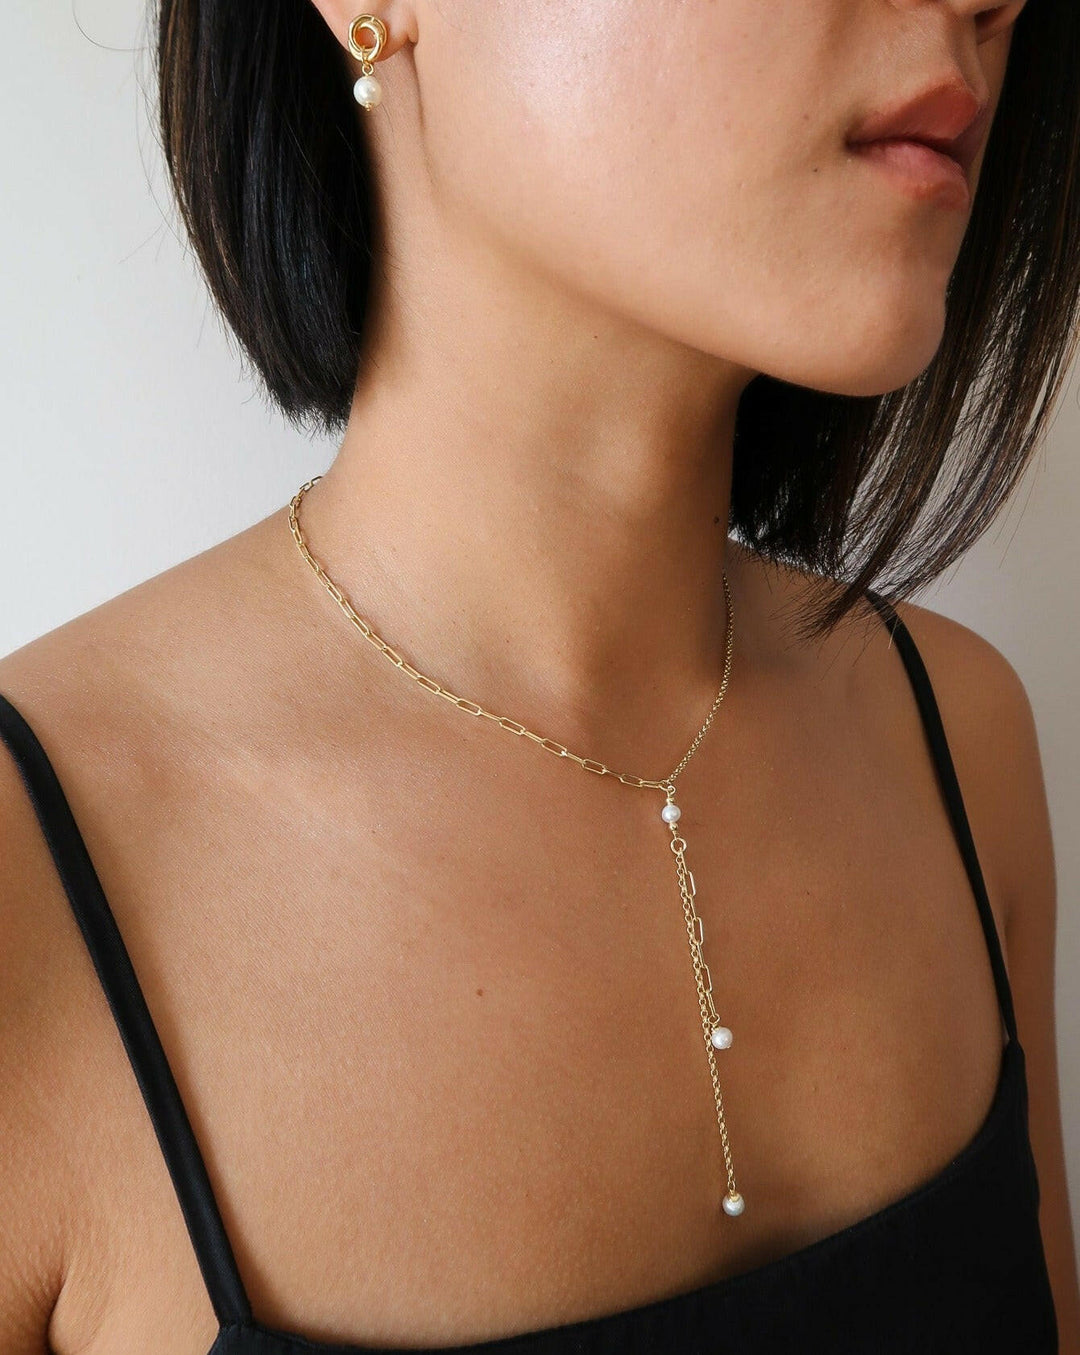 gold and pearl lariat necklace with pearls dripping down